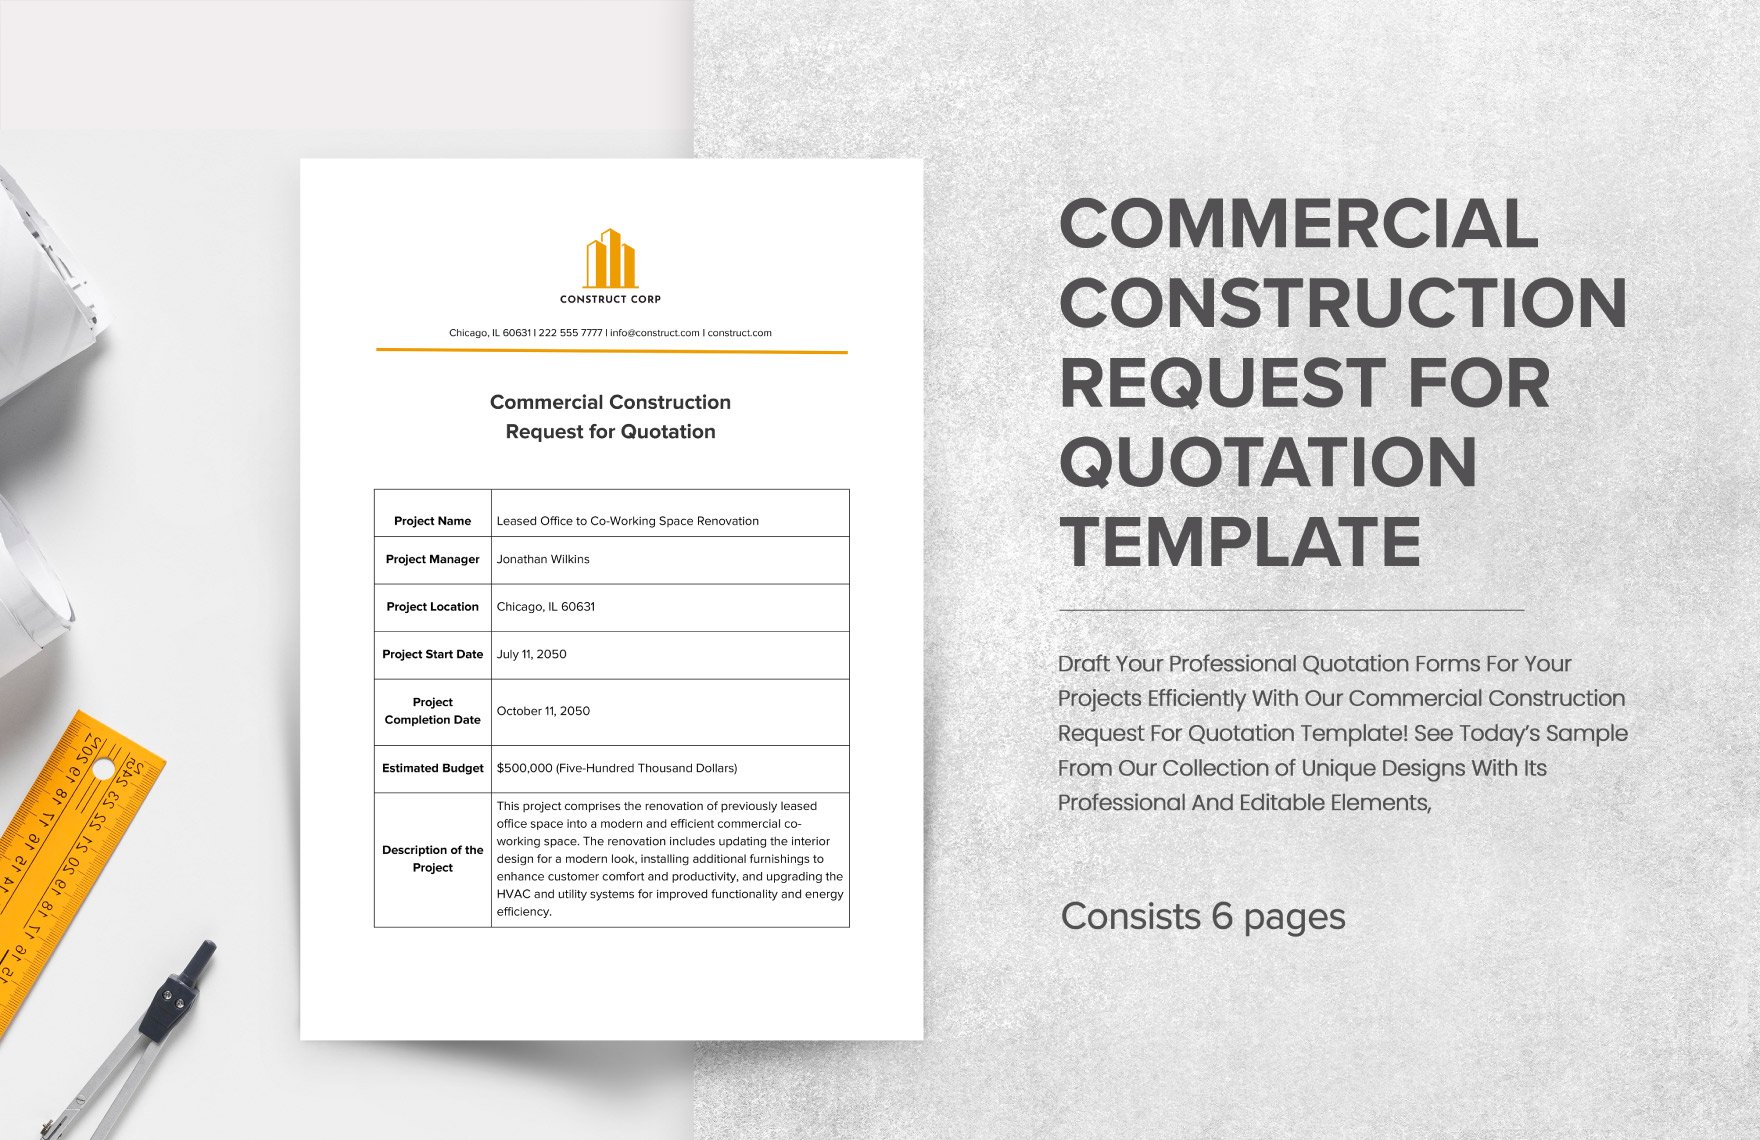 Commercial Construction Request for Quotation Template 